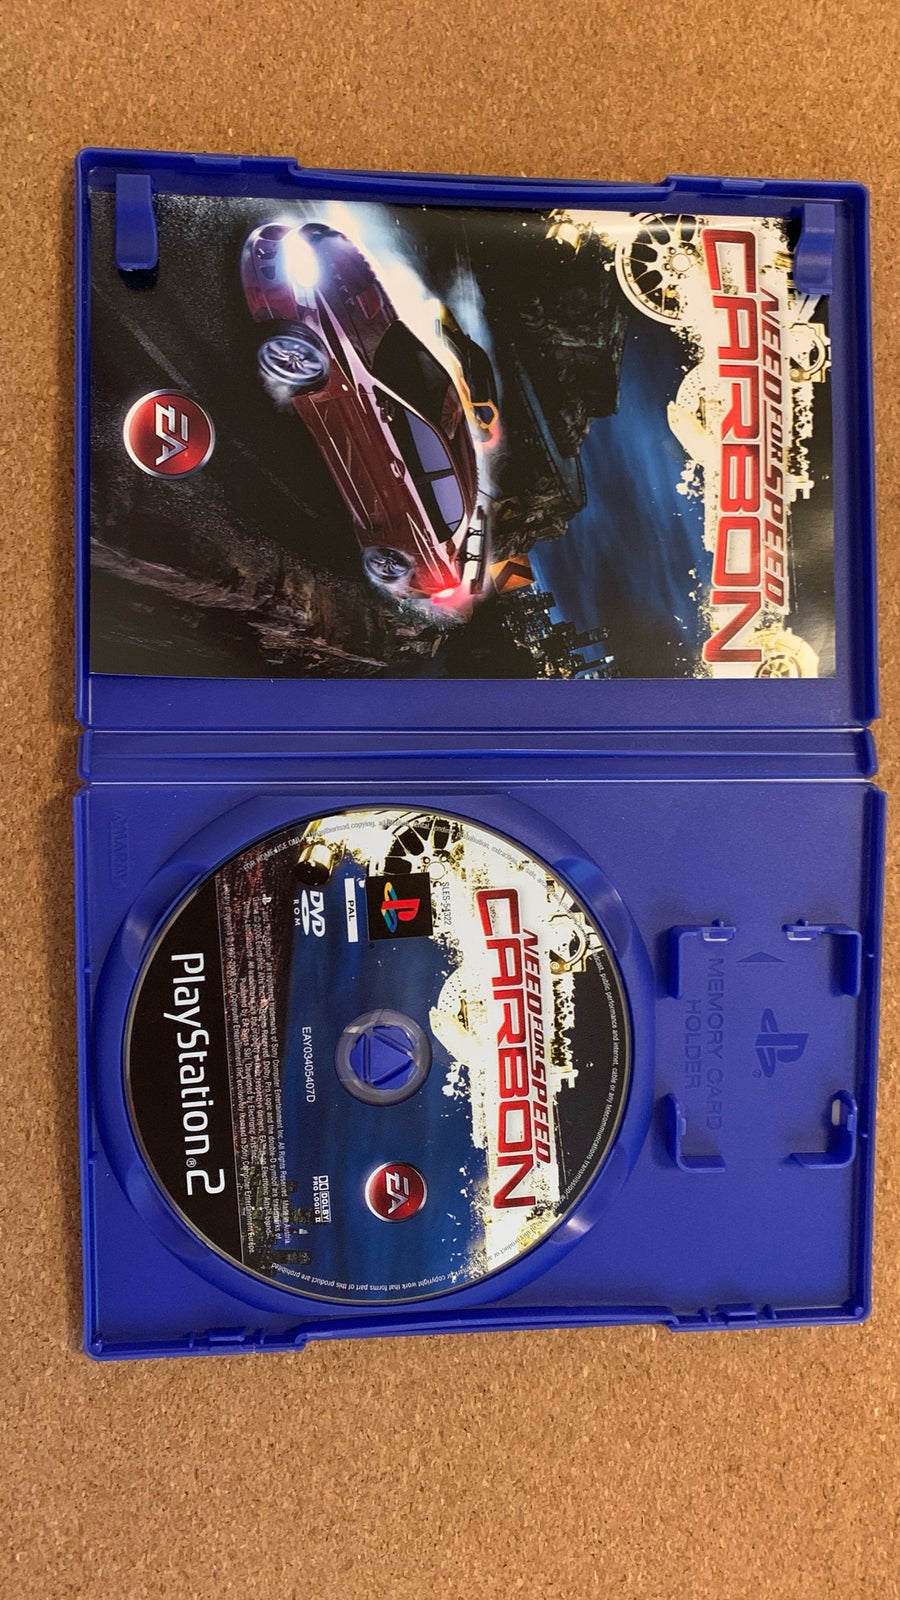 Need for speed Carbon, PS2, racing